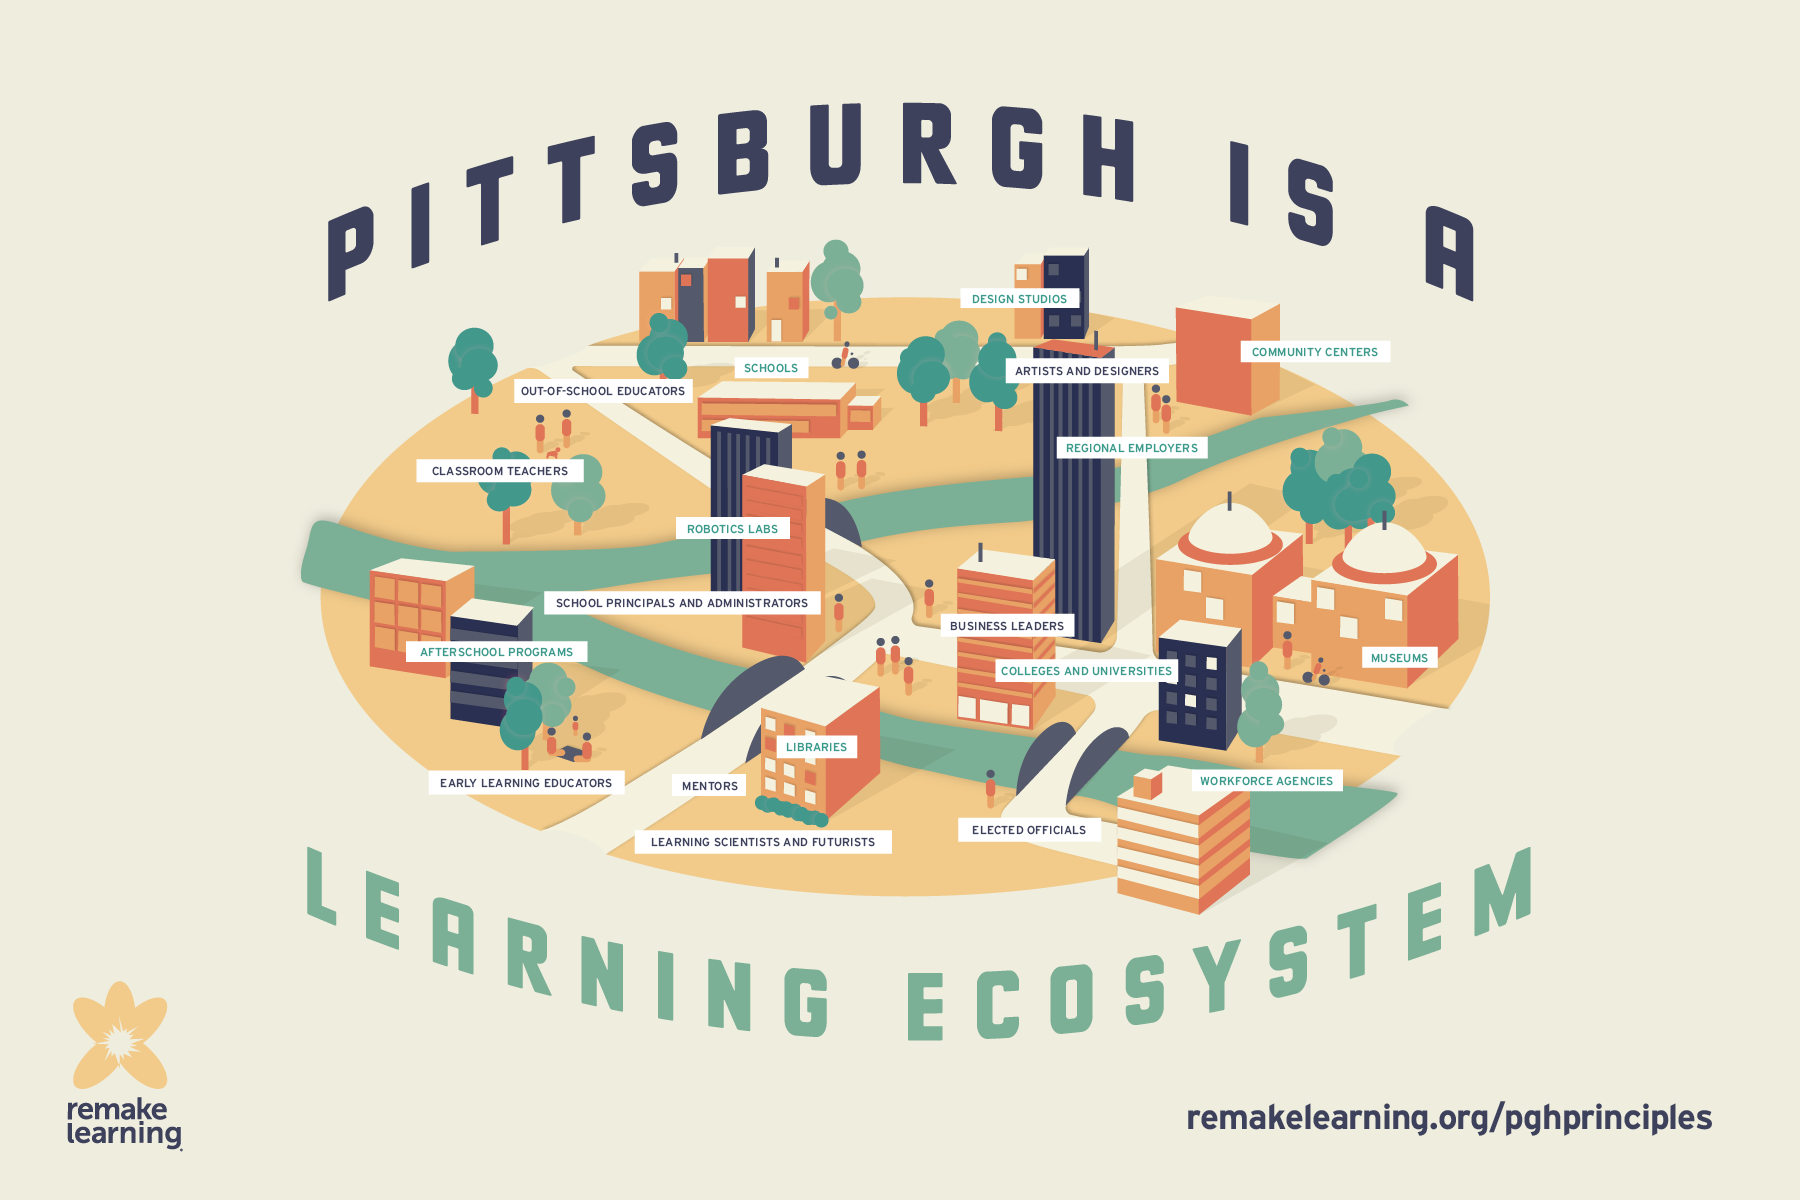 A map of the city of Pittsburgh, surrounded by the text "Pittsburgh is a Learning Ecosystem"